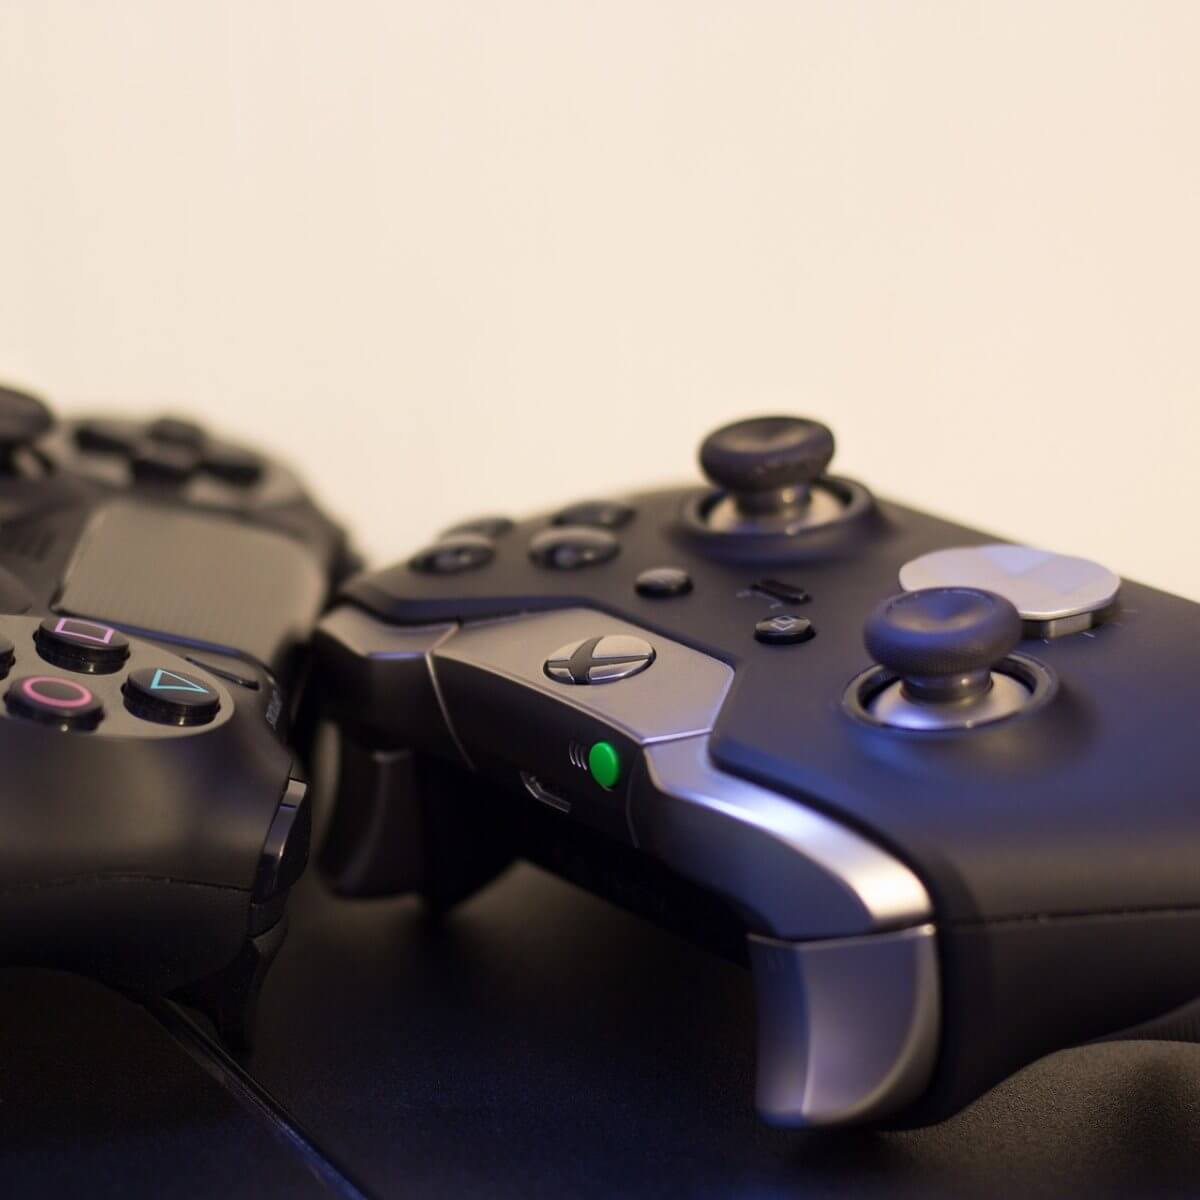 Your network is behind a port-restricted NAT Xbox One